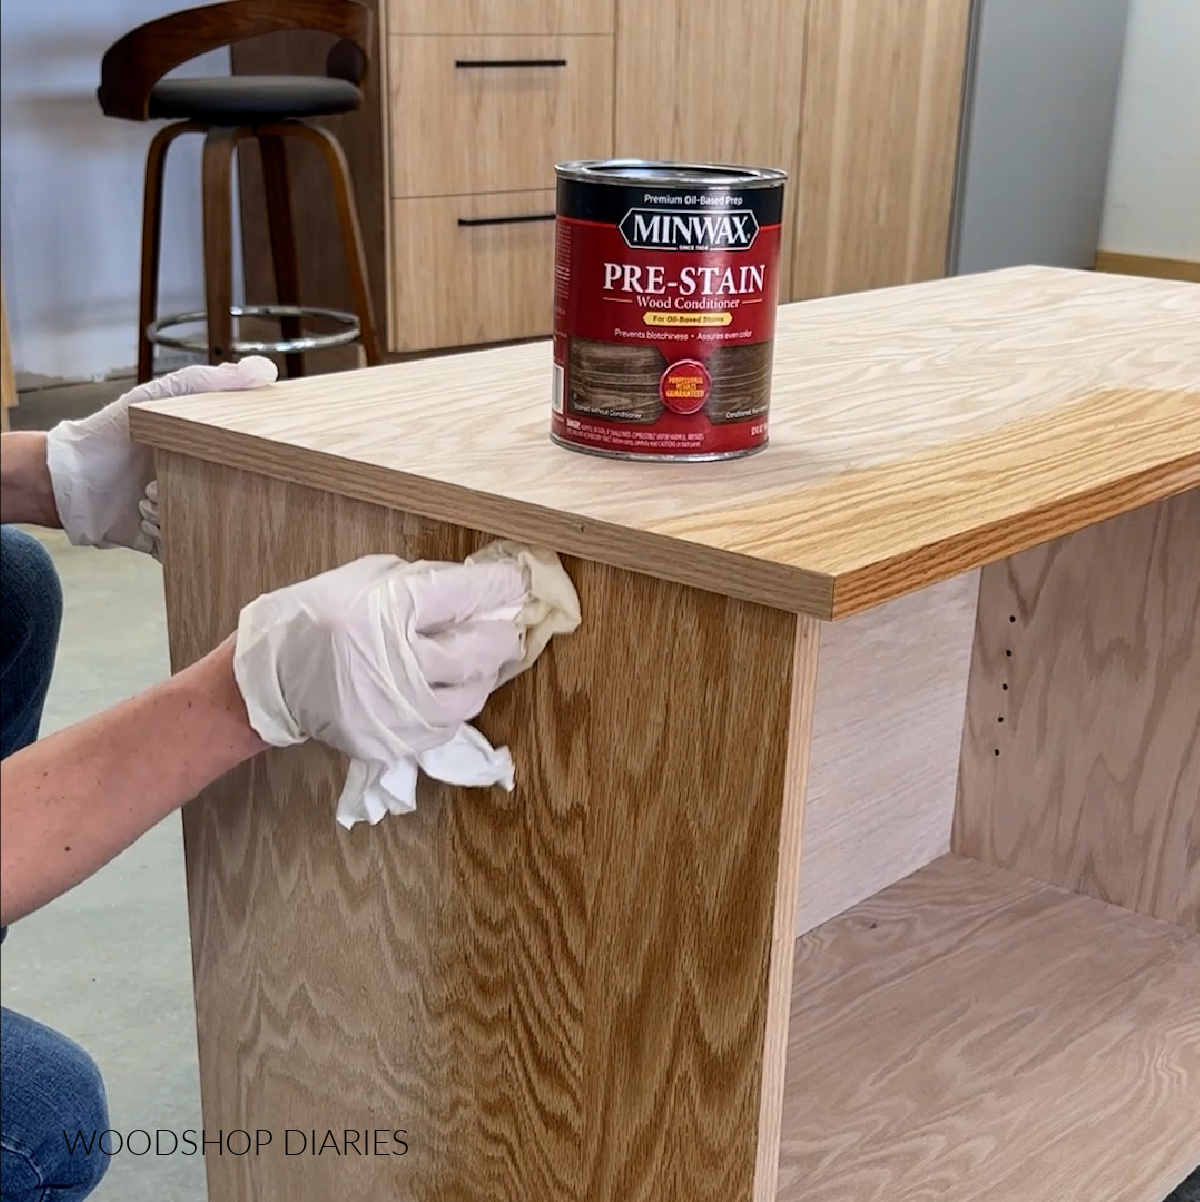 Shara Woodshop Diaries applying Minwax wood conditioner to oak cabinet with rag